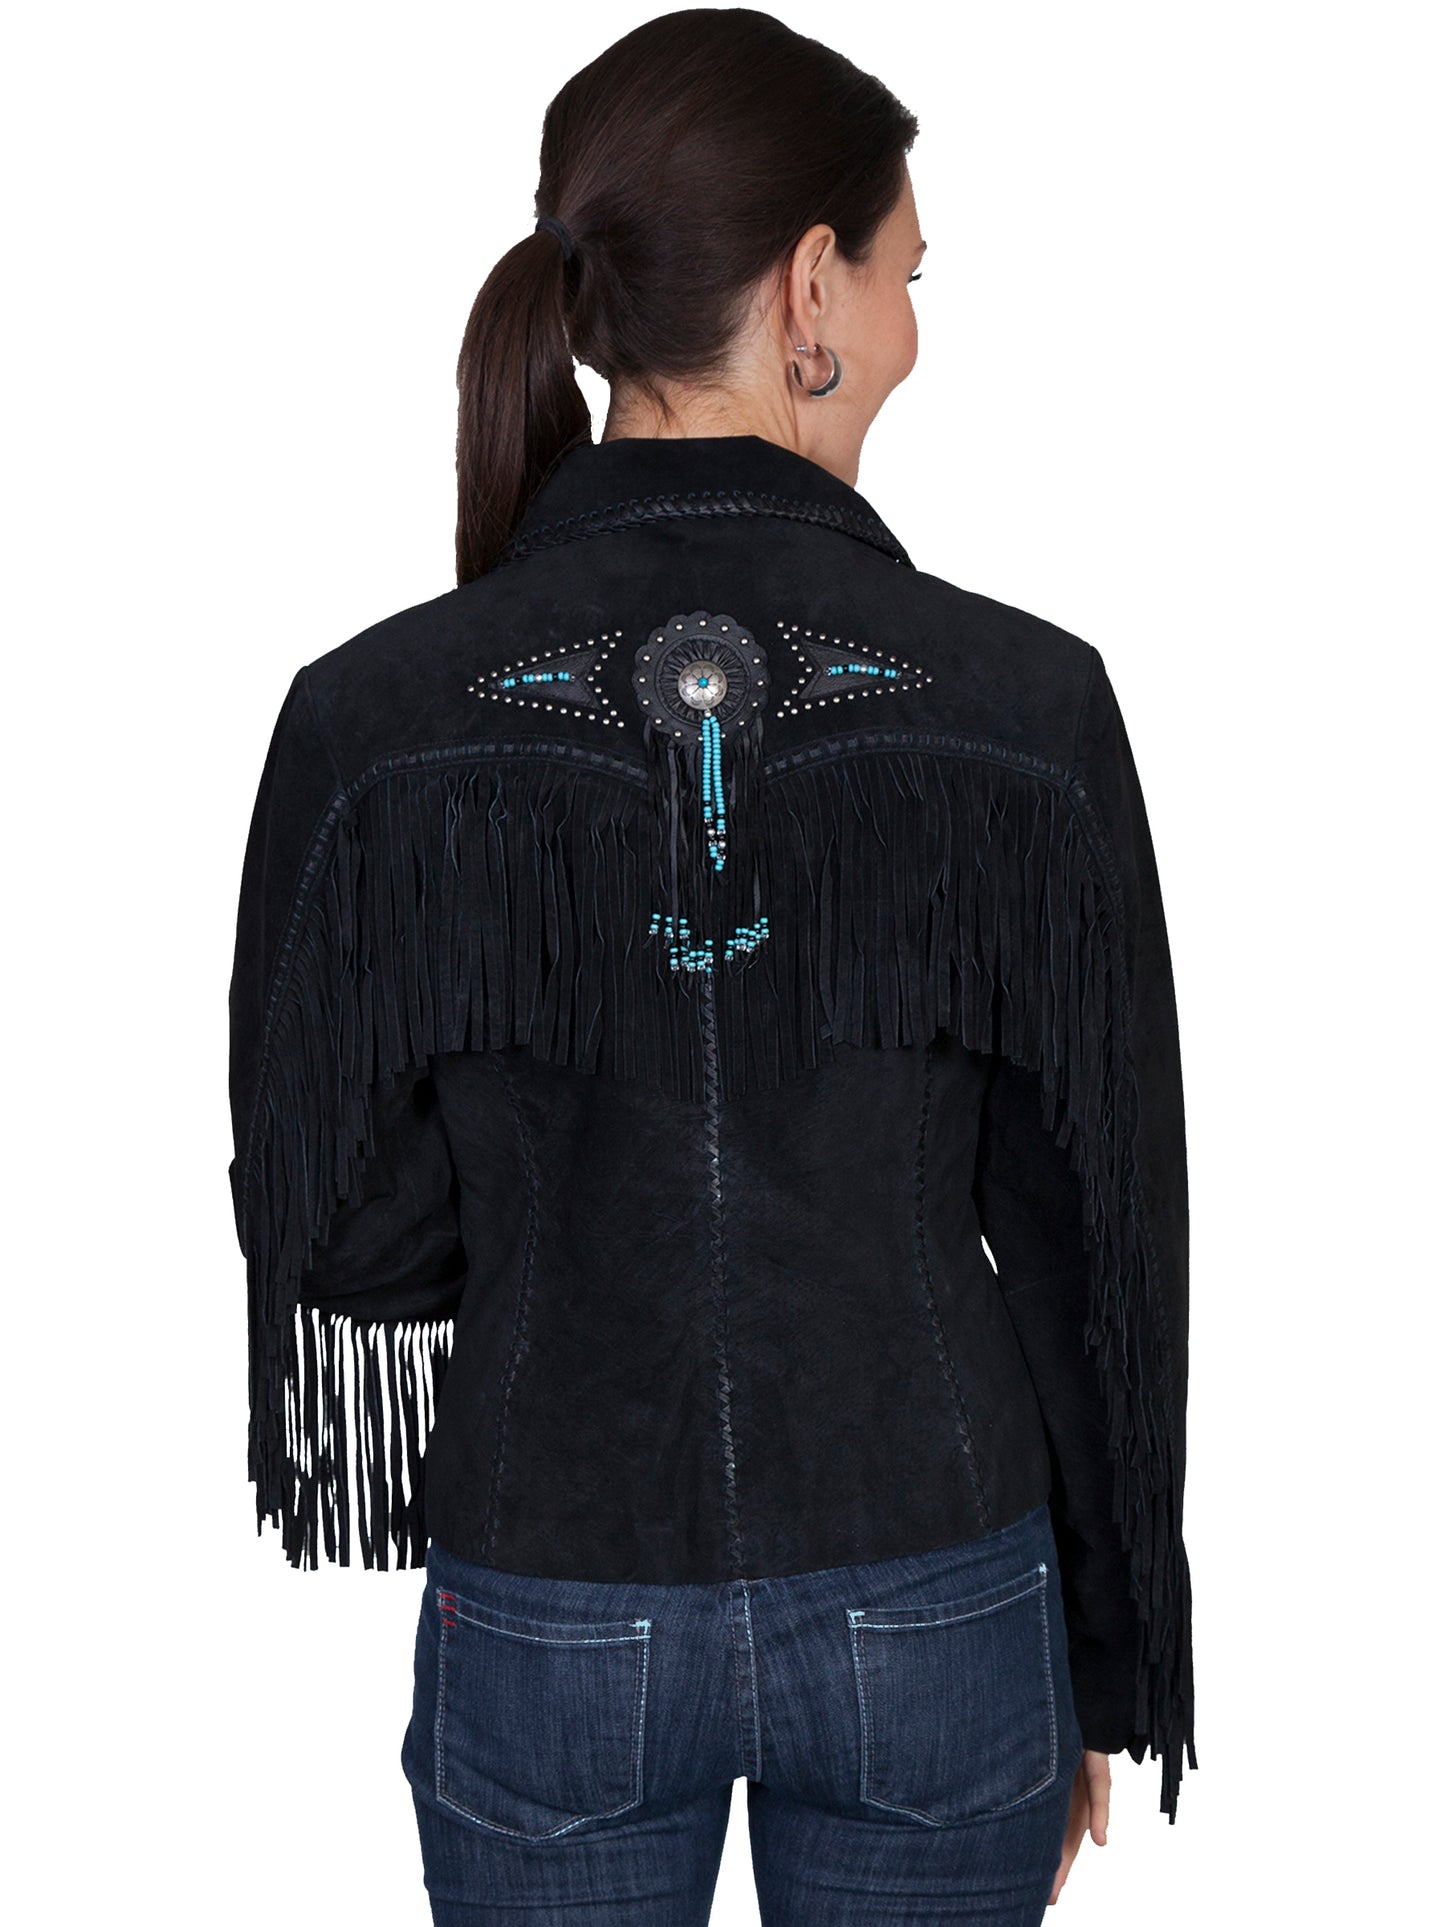 Black Fringe & Beaded Suede Jacket by Scully at Bourbon Cowgirl